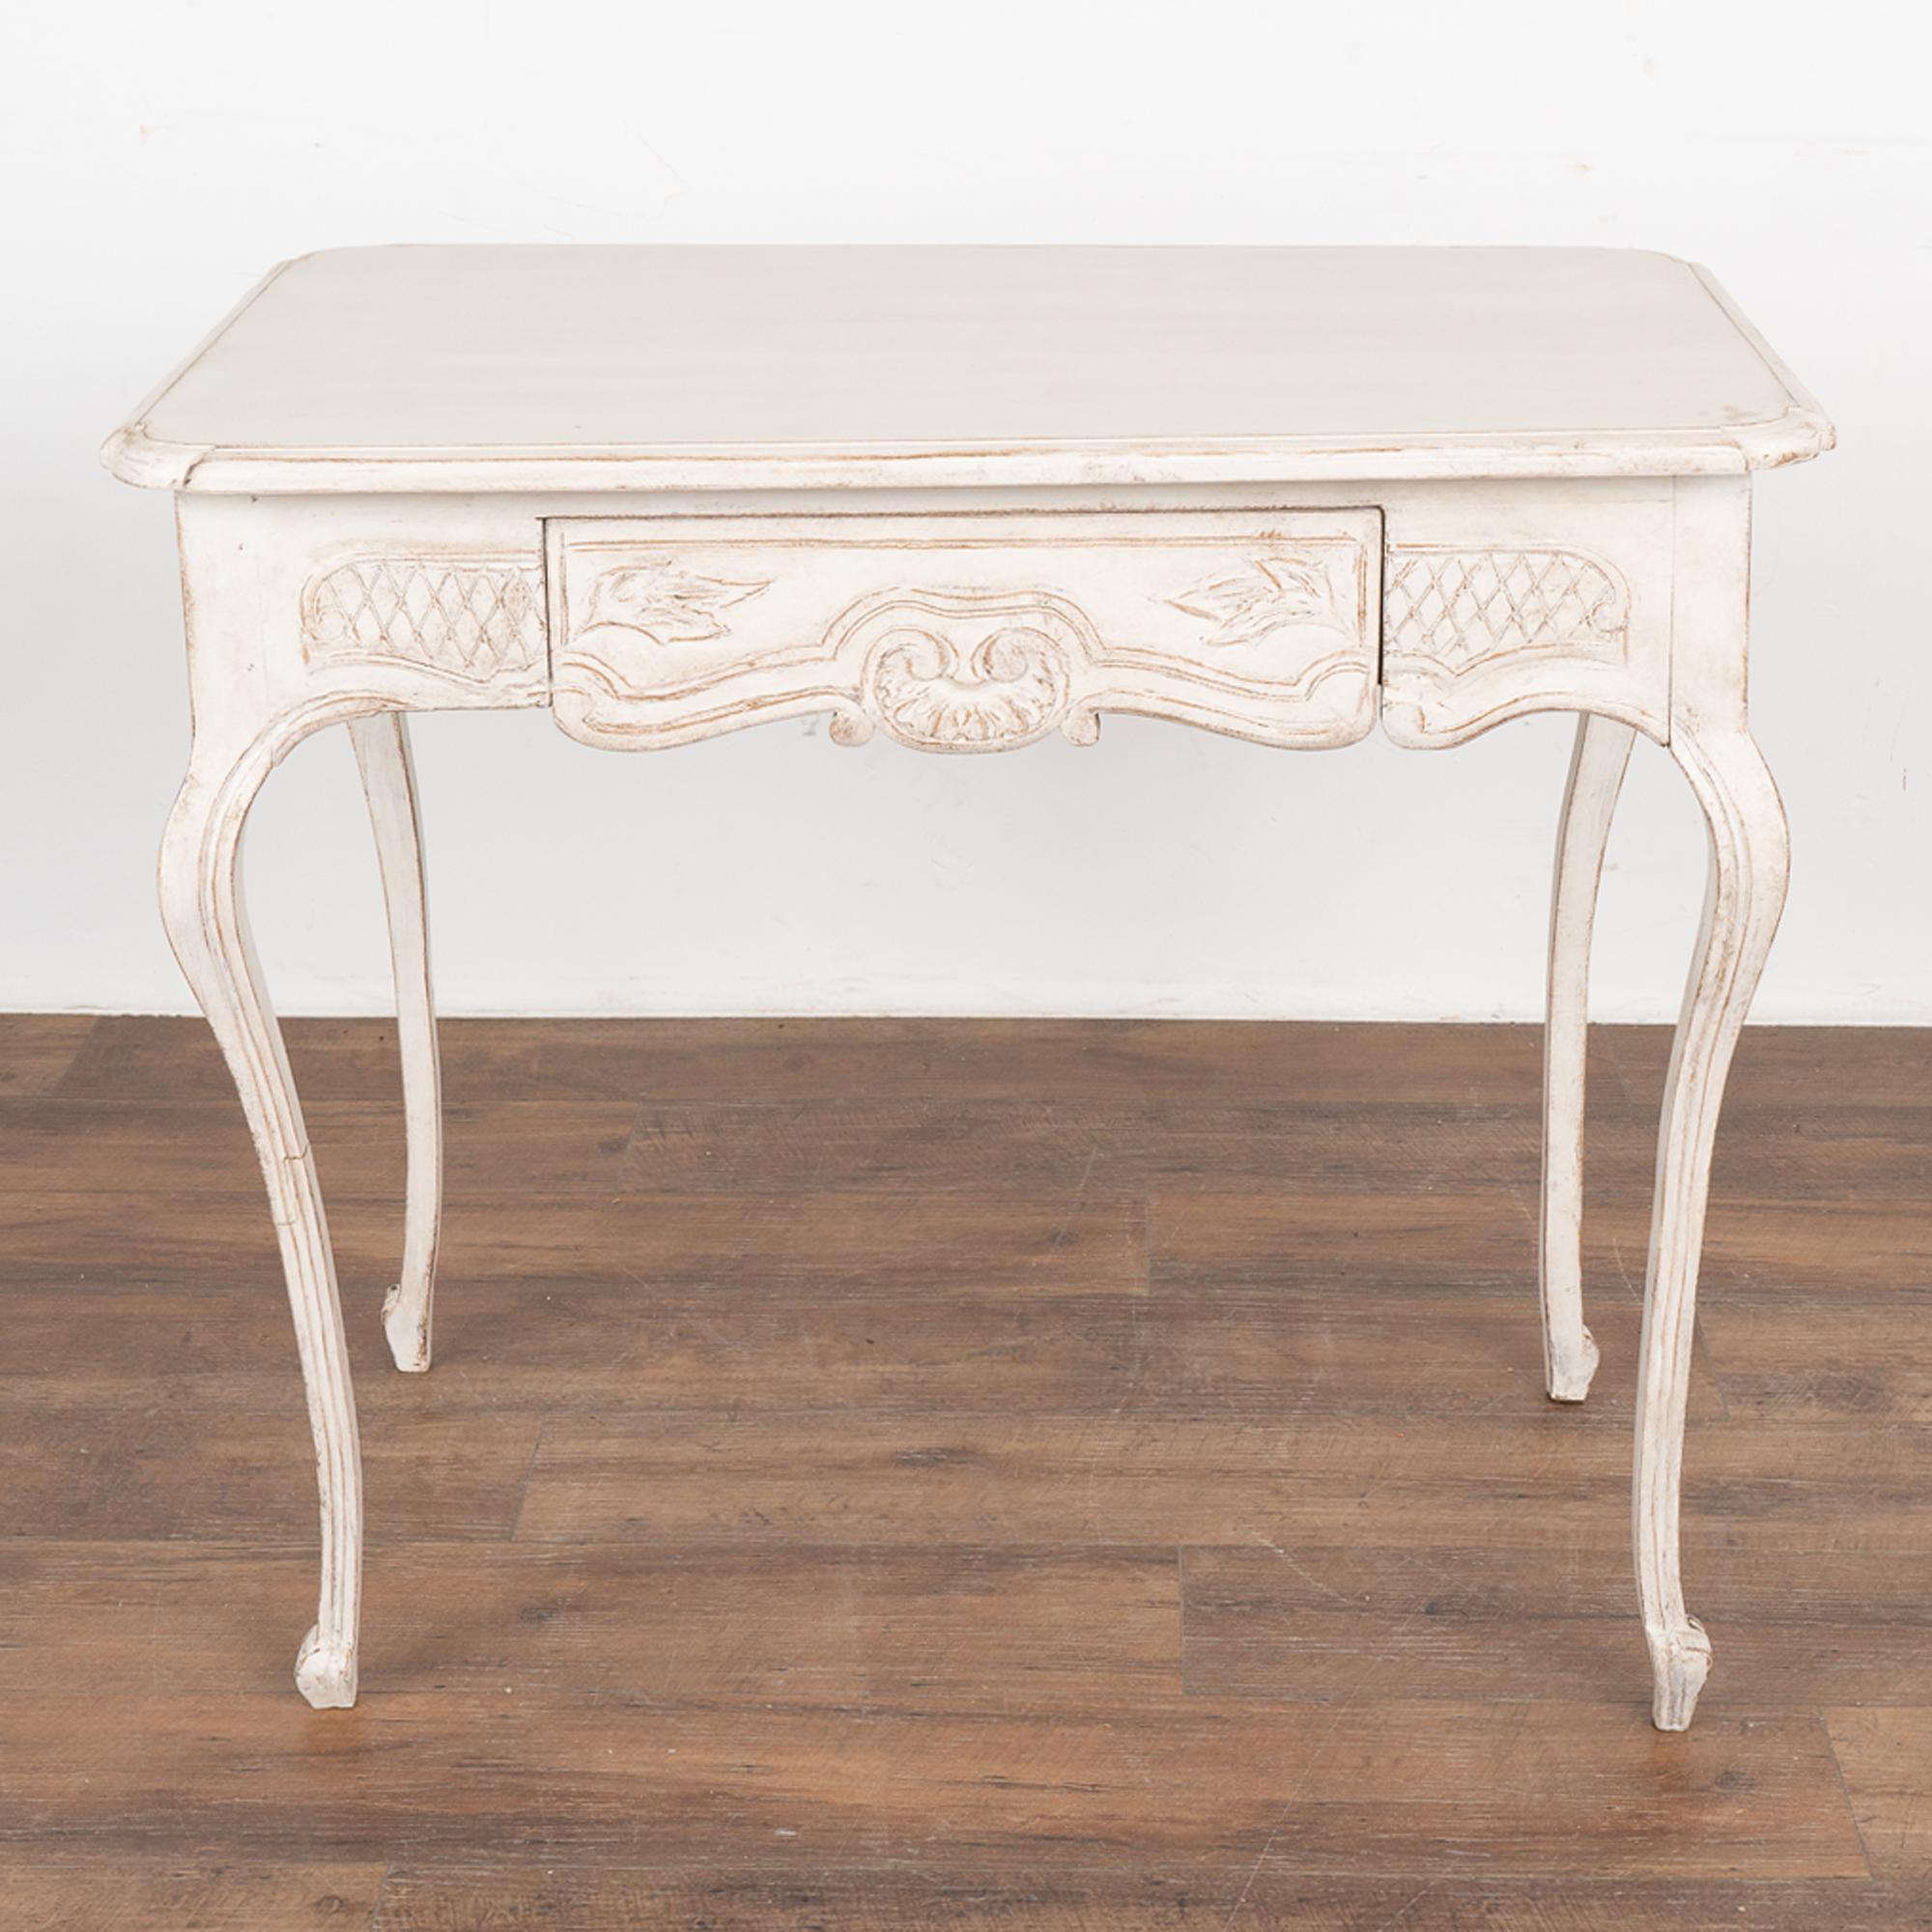 Gustavian White Painted Side Table With Drawer, Sweden circa 1820-40 In Good Condition For Sale In Round Top, TX